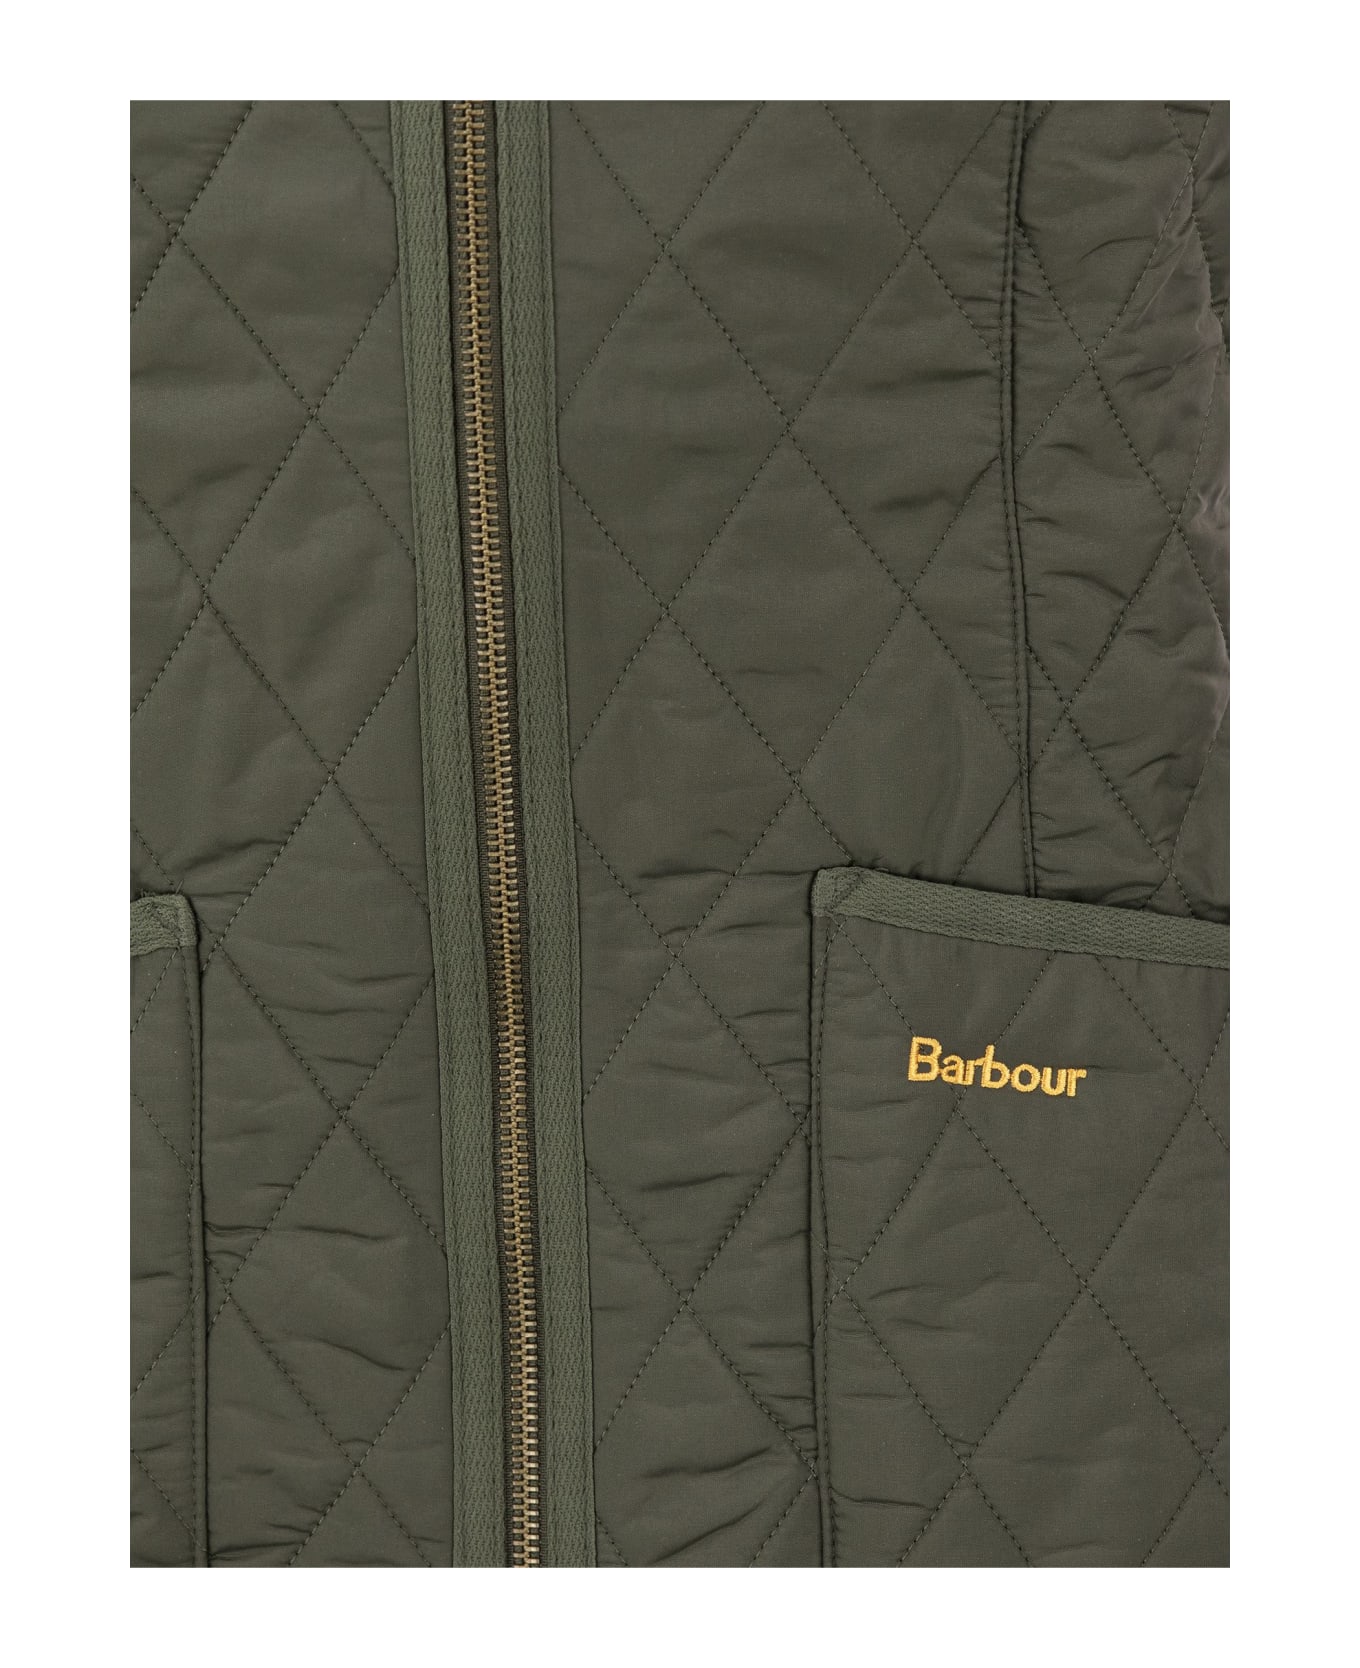 Barbour Betty - Lined Waistcoat - Olive Green